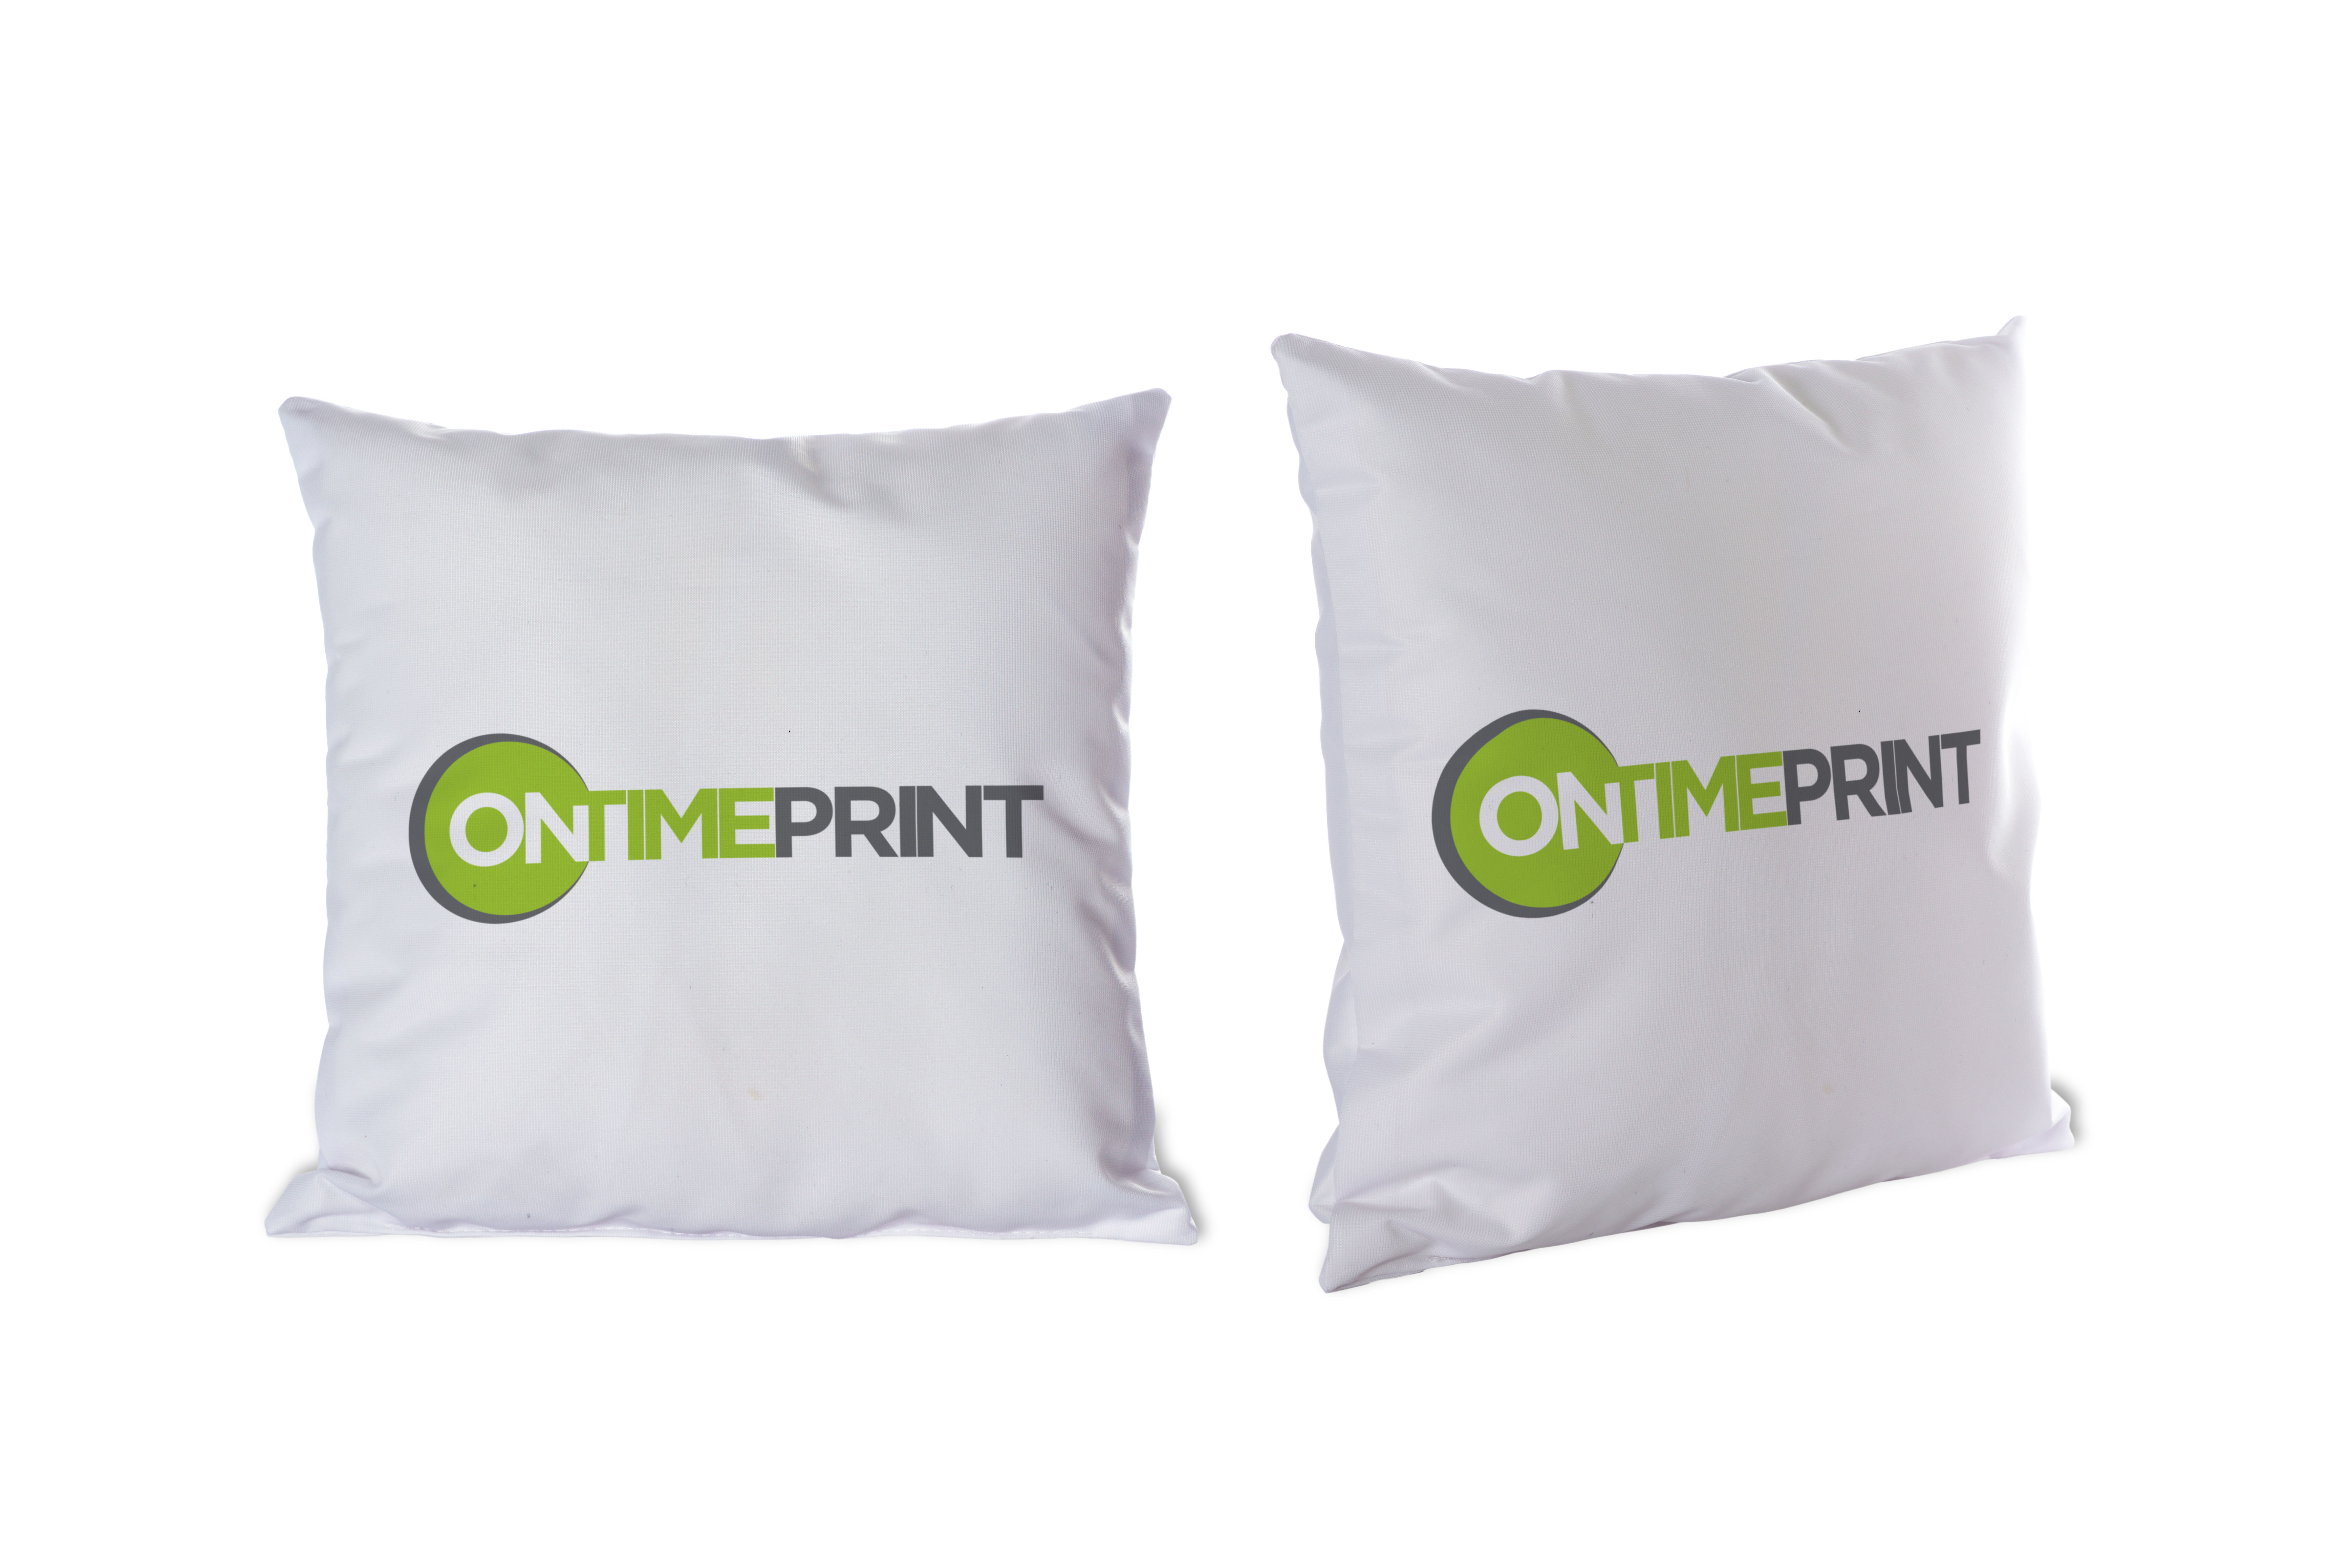 Pillows Full Colour Print  Printing UK, Next Day Delivery - www.ontimeprint.co.uk